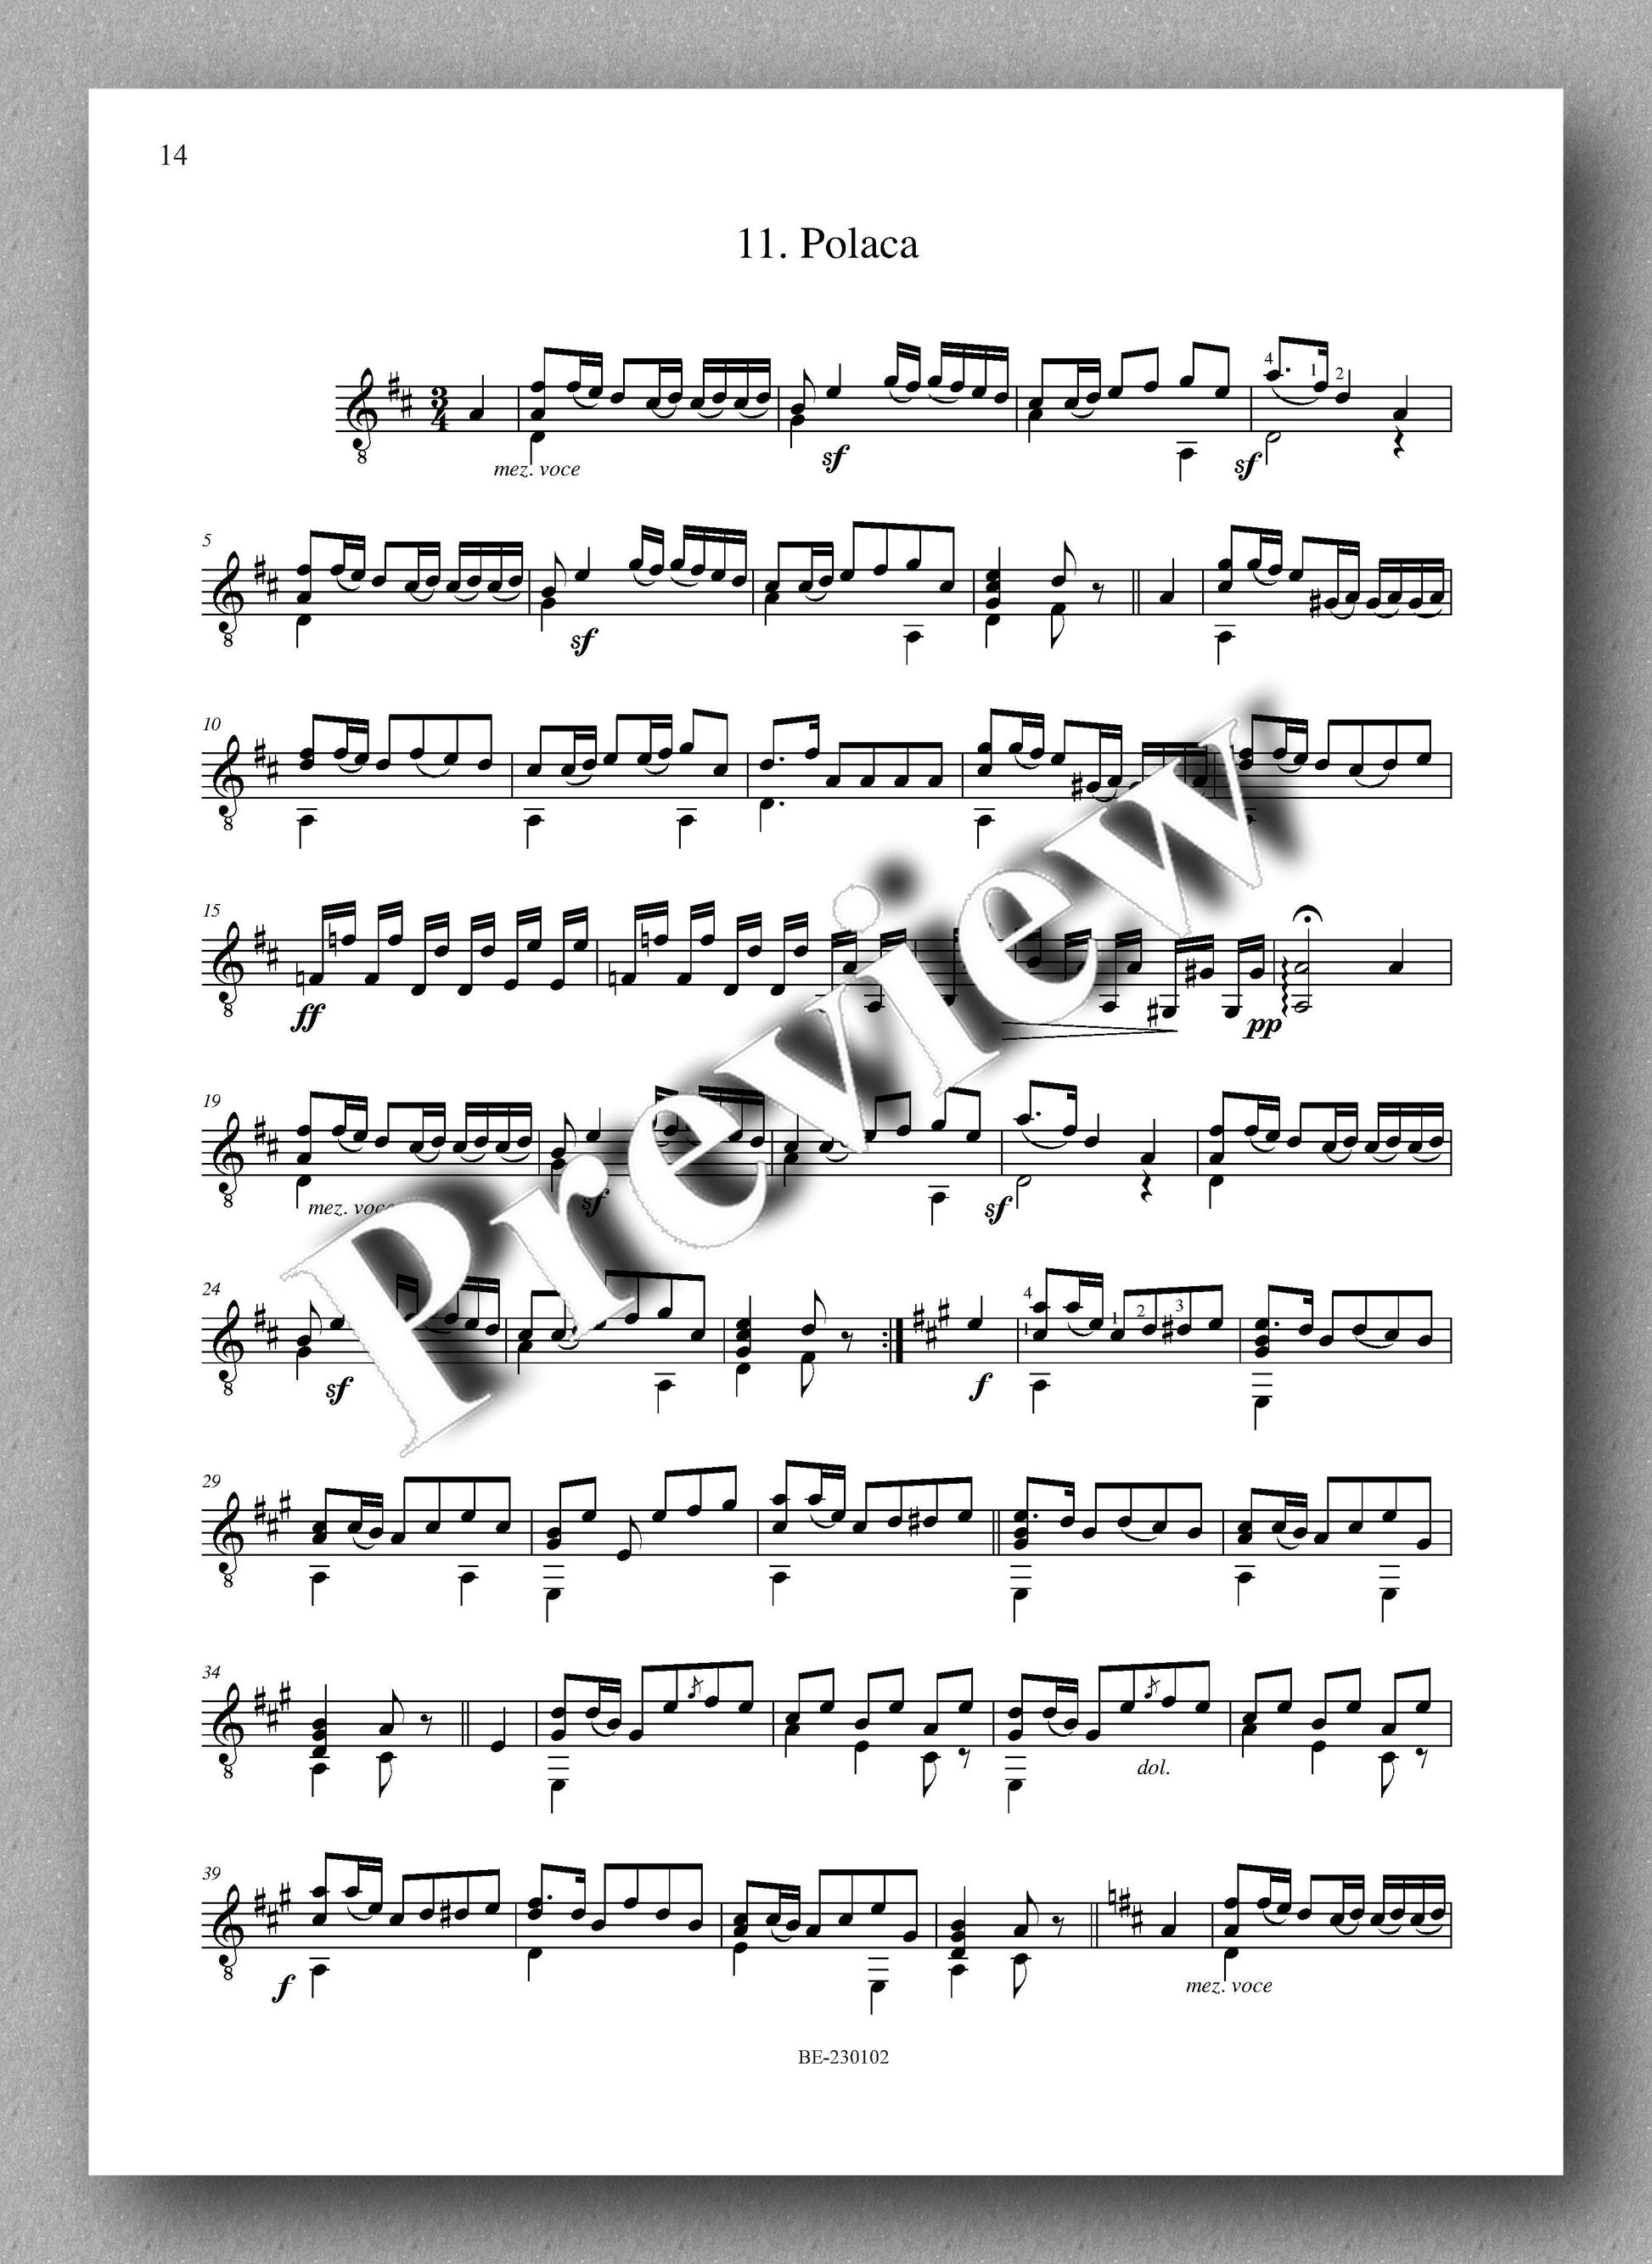 Molino, Collected Works for Guitar Solo, Vol. 14 - Preview of the music score 4